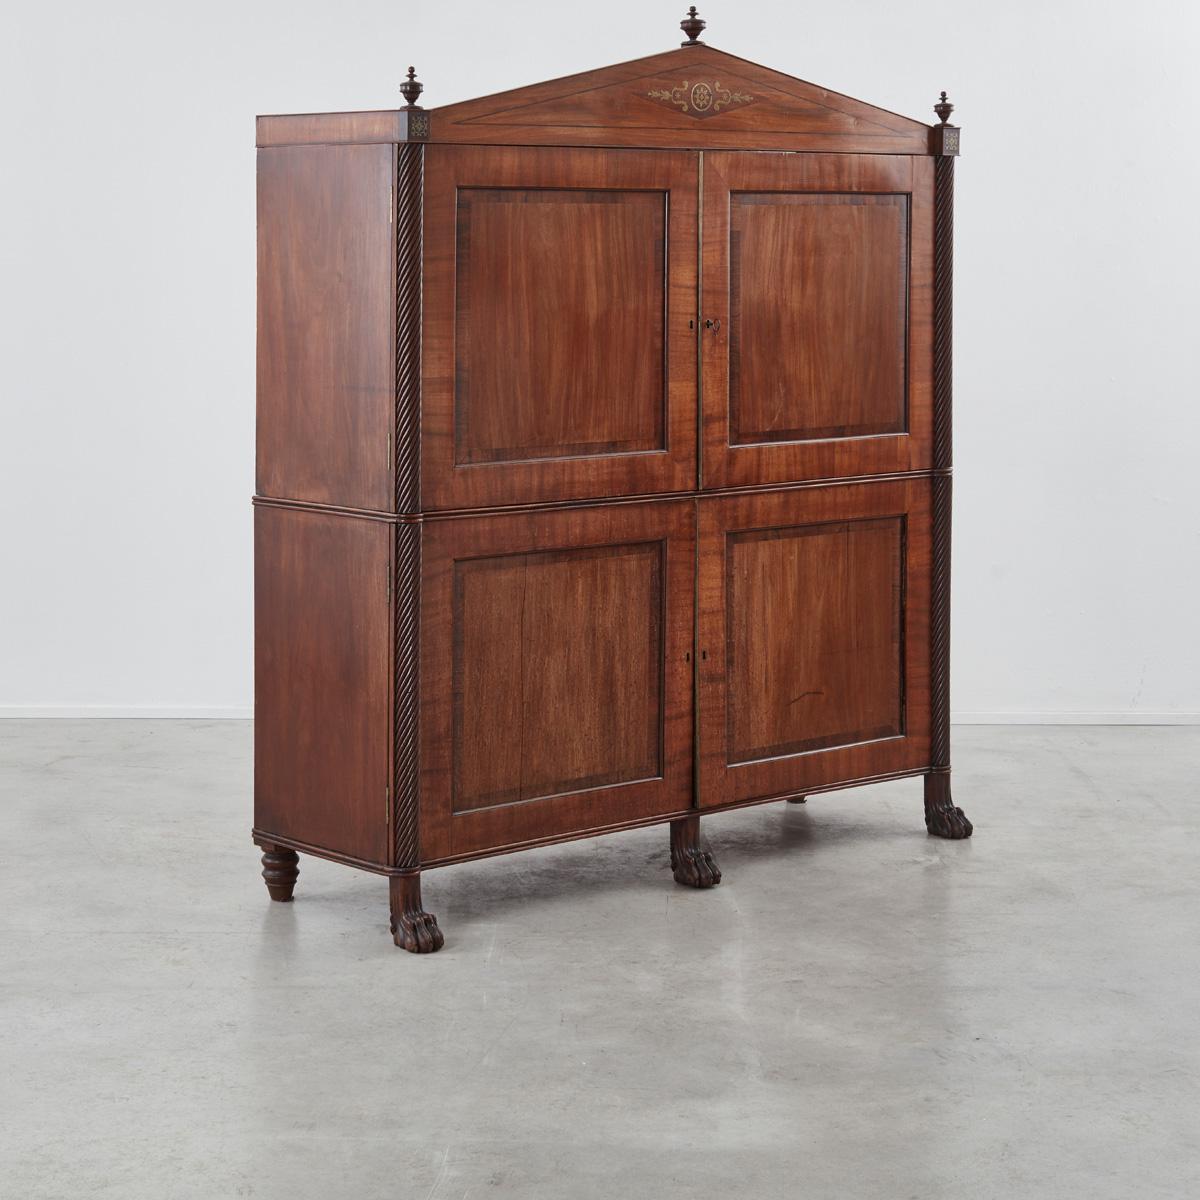 This classically inspired and elegantly proportioned wardrobe in mahogany and rosewood was crafted in Germany in the 1820. Its four hinged doors open upon several neatly designed compartmentalised spaces that now serve as shelves, having once